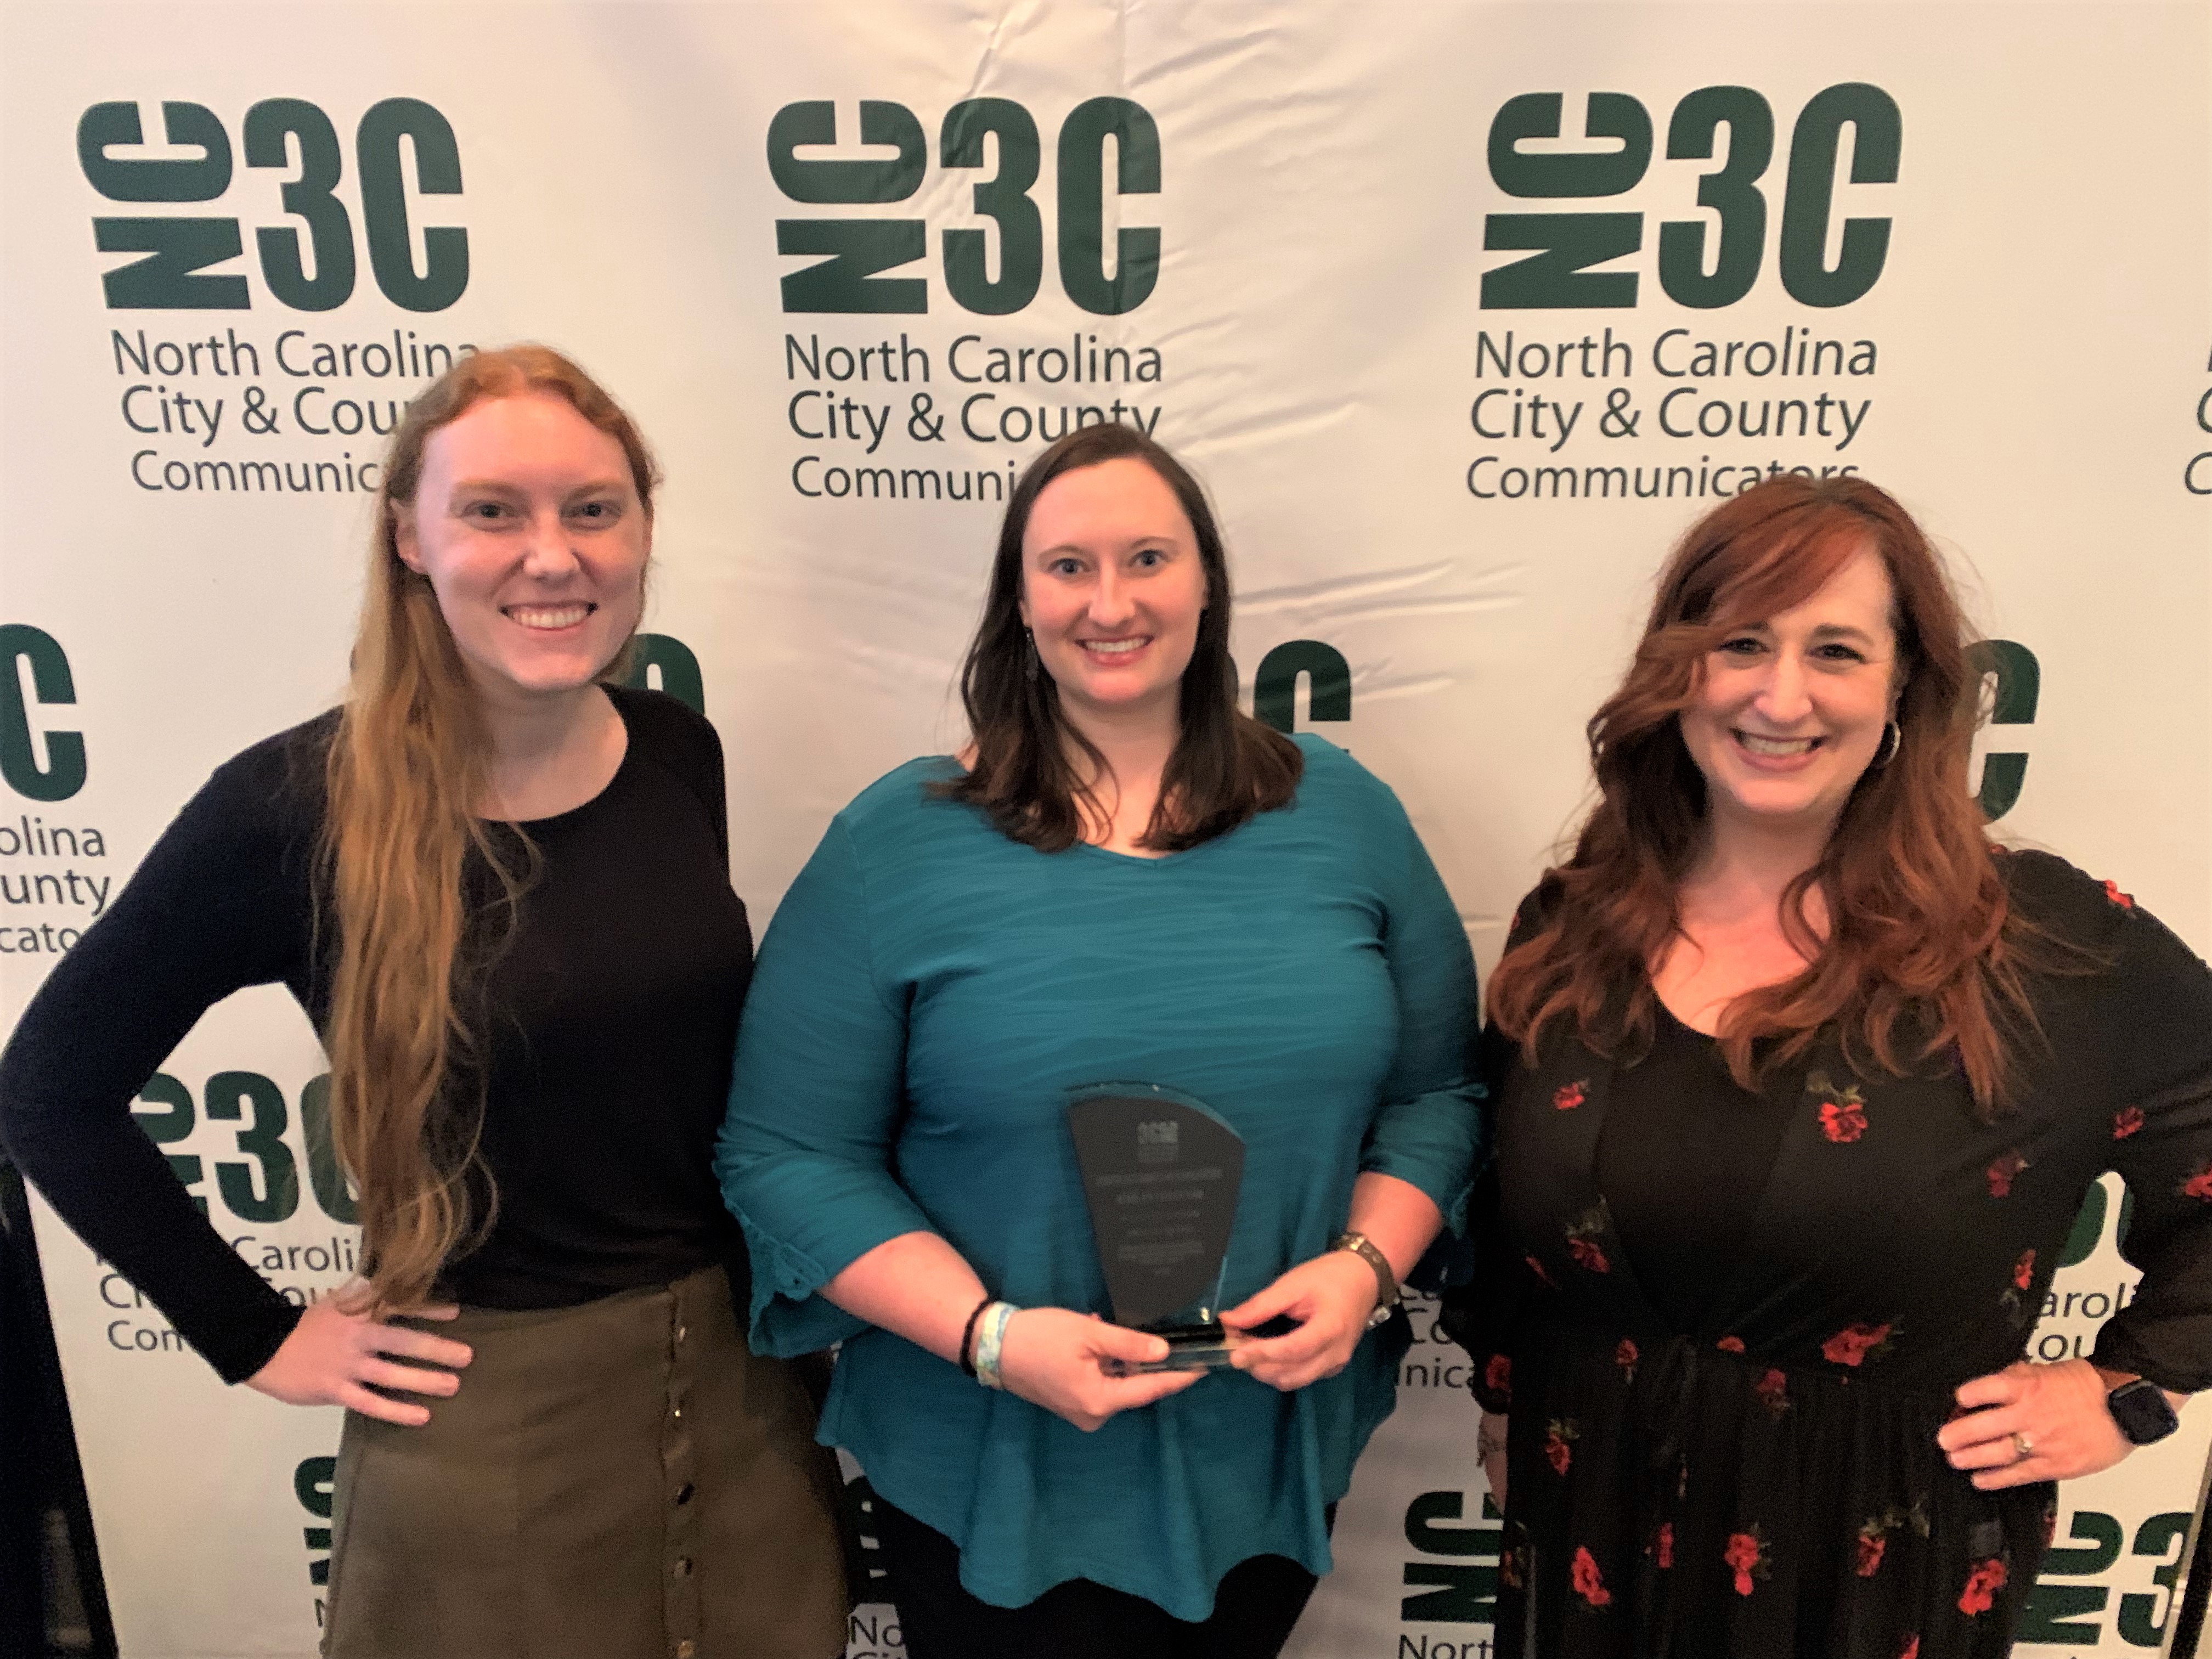 City of Hickory Communications Team with NC3C Award